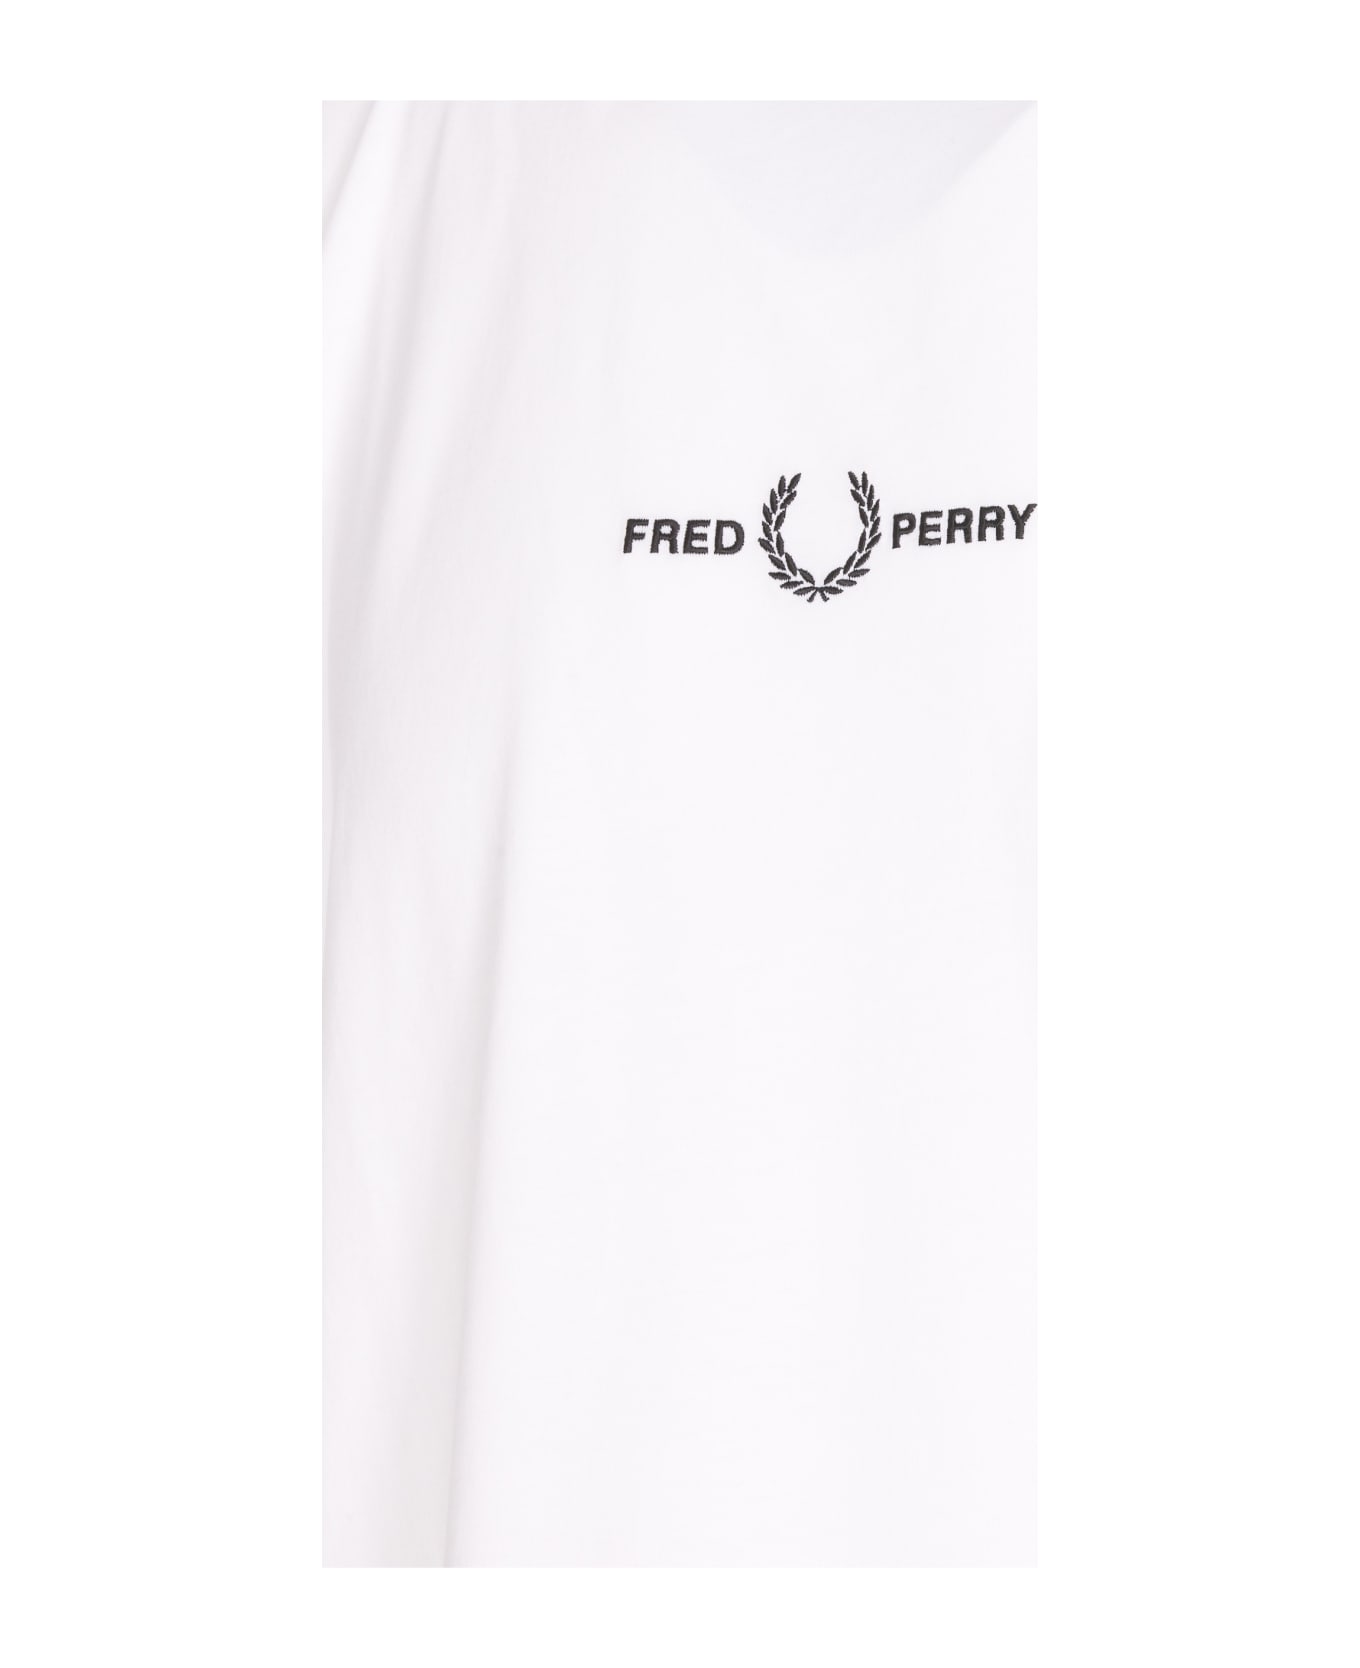 Fred Perry Embroidered Logo T-shirt - White シャツ